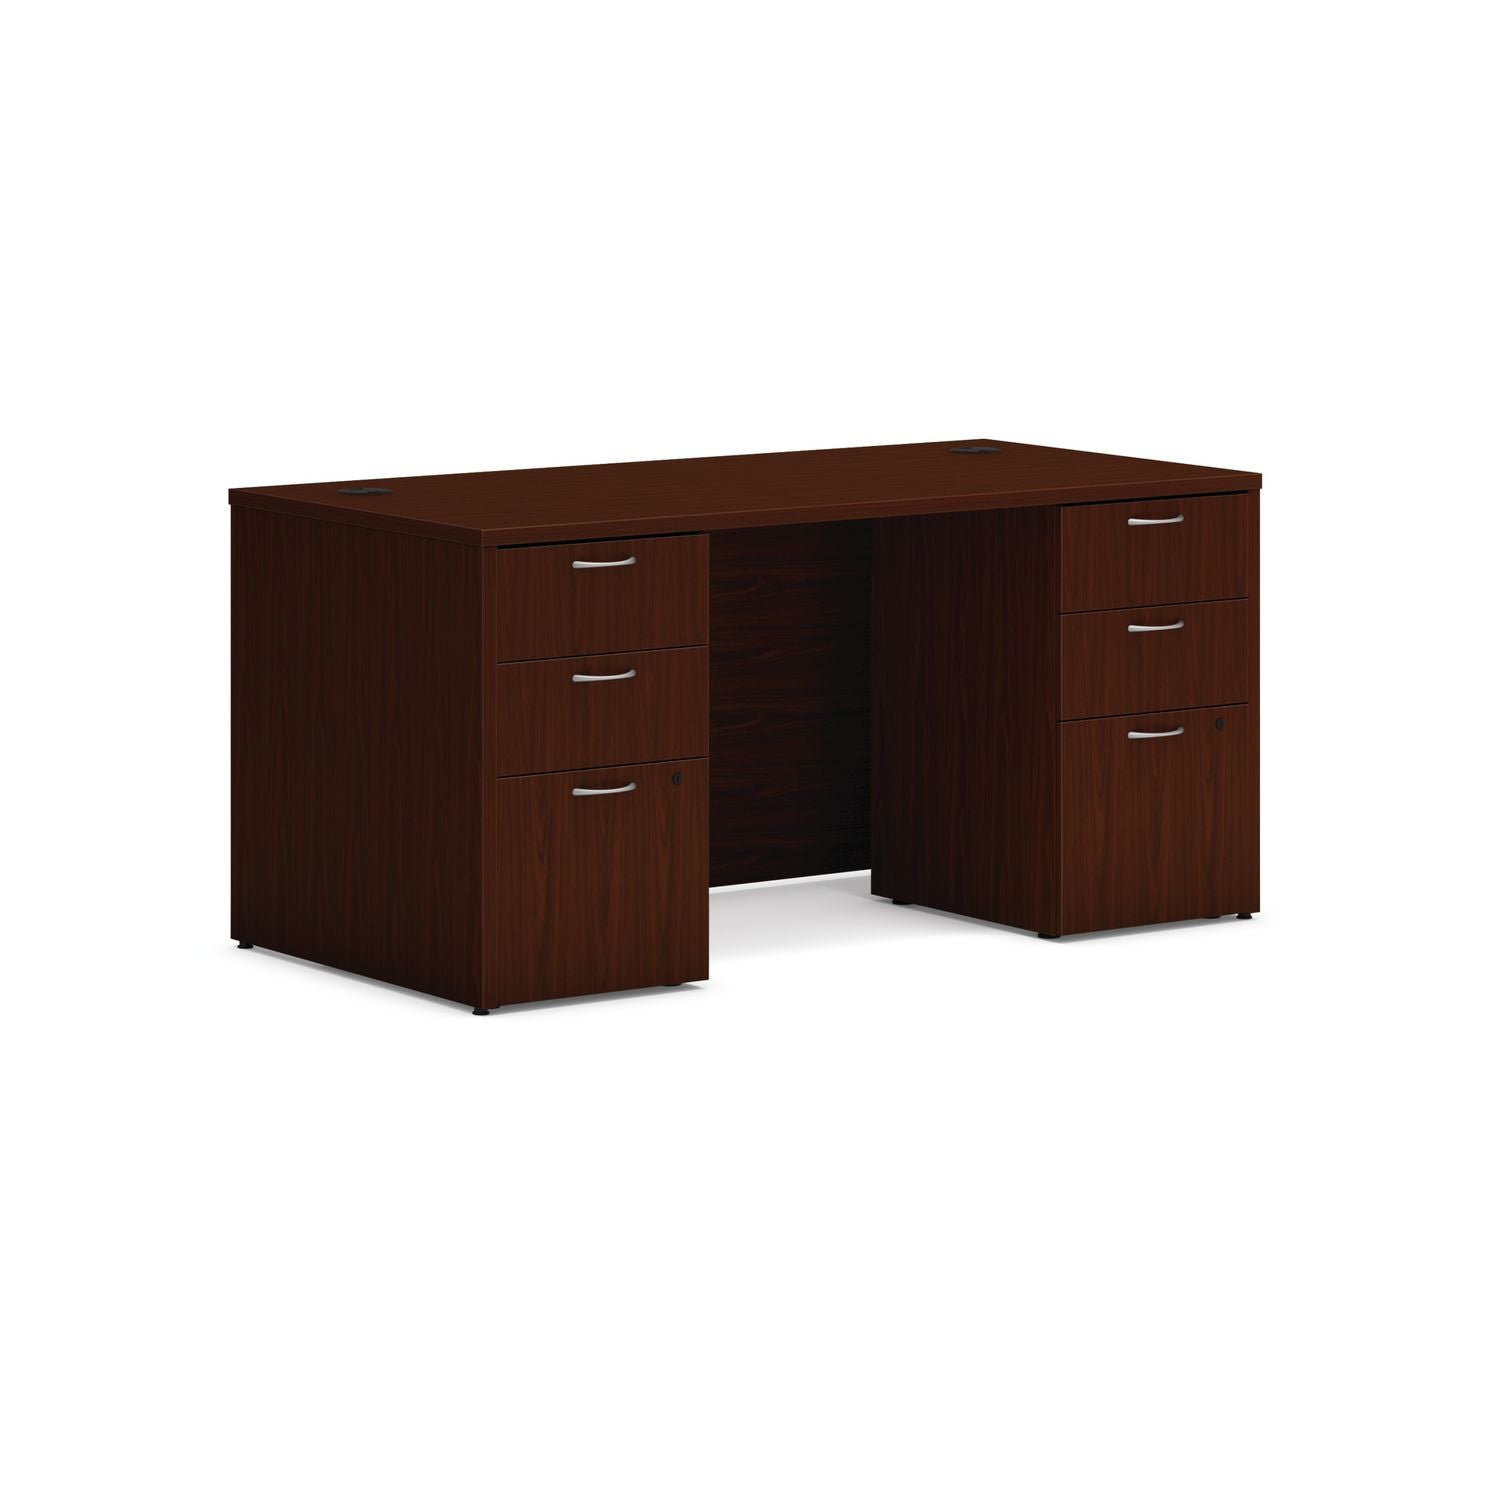 mod-double-pedestal-desk-bundle-60-x-30-x-29-traditional-mahogany-ships-in-7-10-business-days_honmod178 - 1